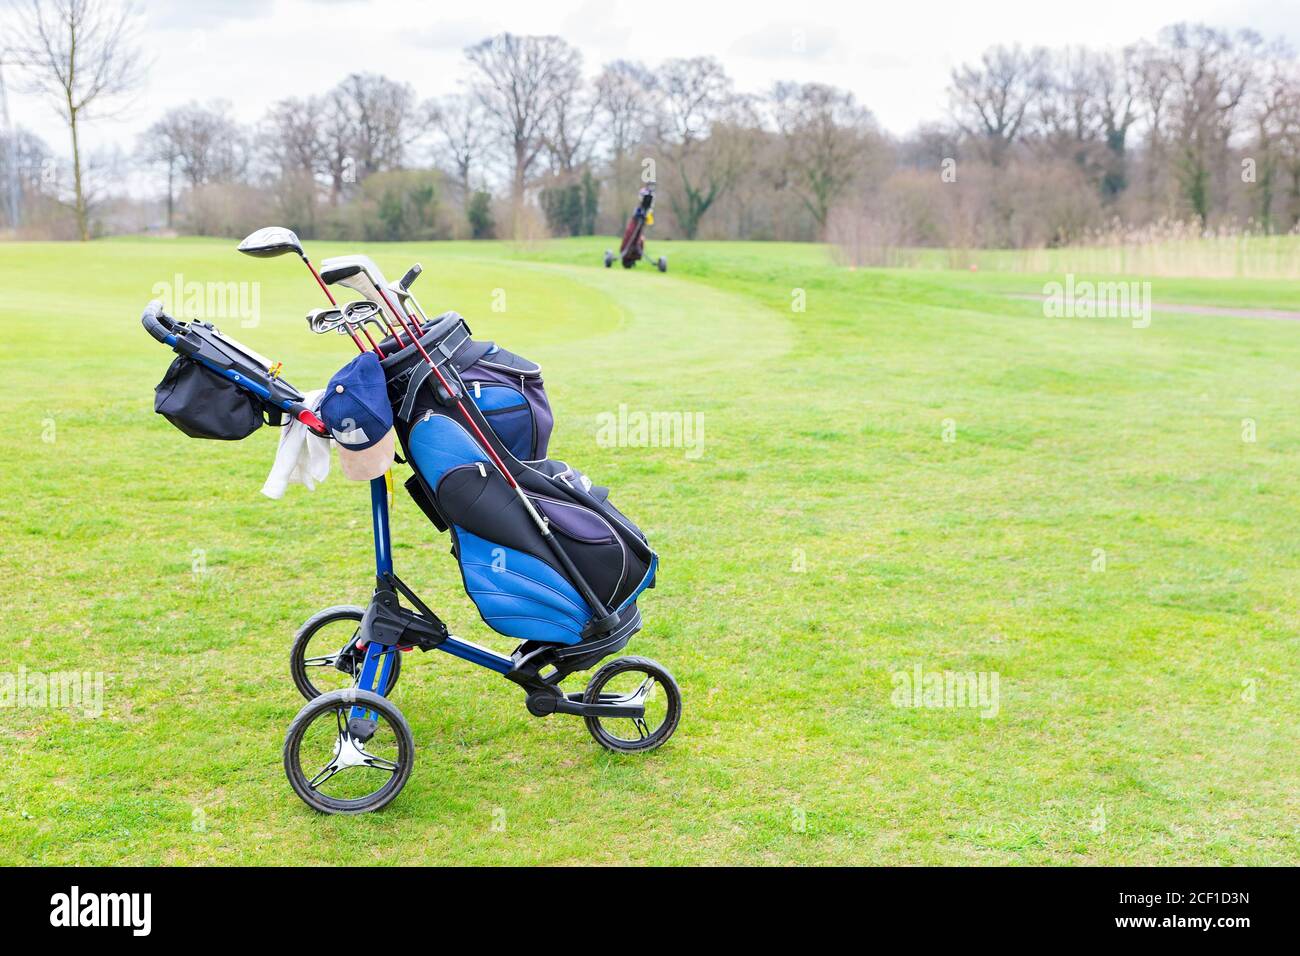 Golf trolley standing on green european golf course Stock Photo